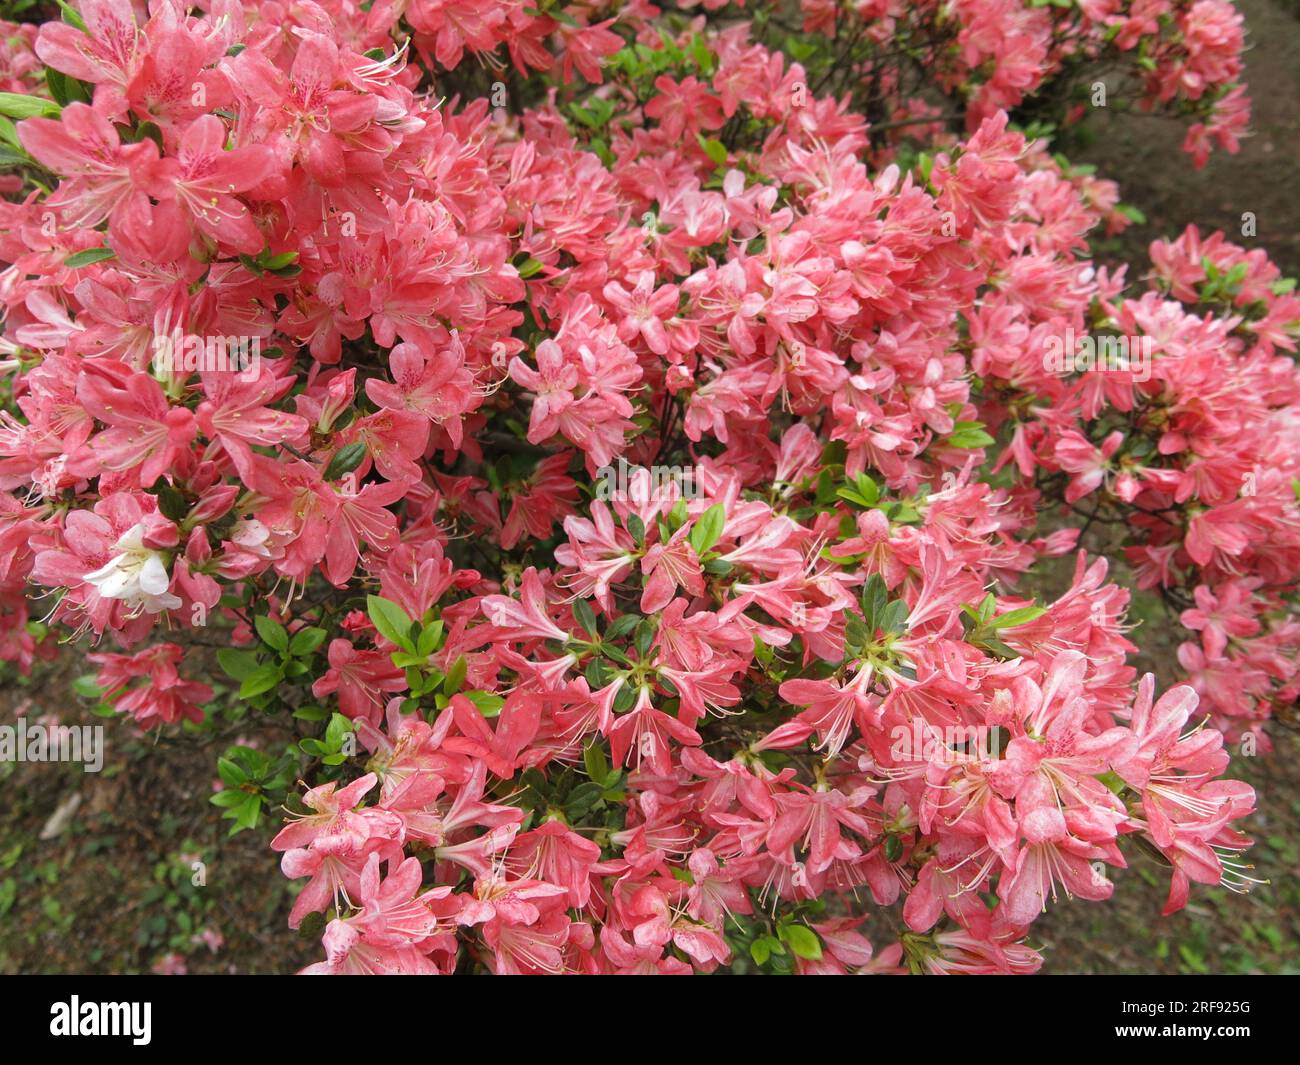 Late April in Japan and the azaleas are in full bloom; a close-up of a pink variety in the gardens of the Meiji Shrine, Tokyo. Stock Photo